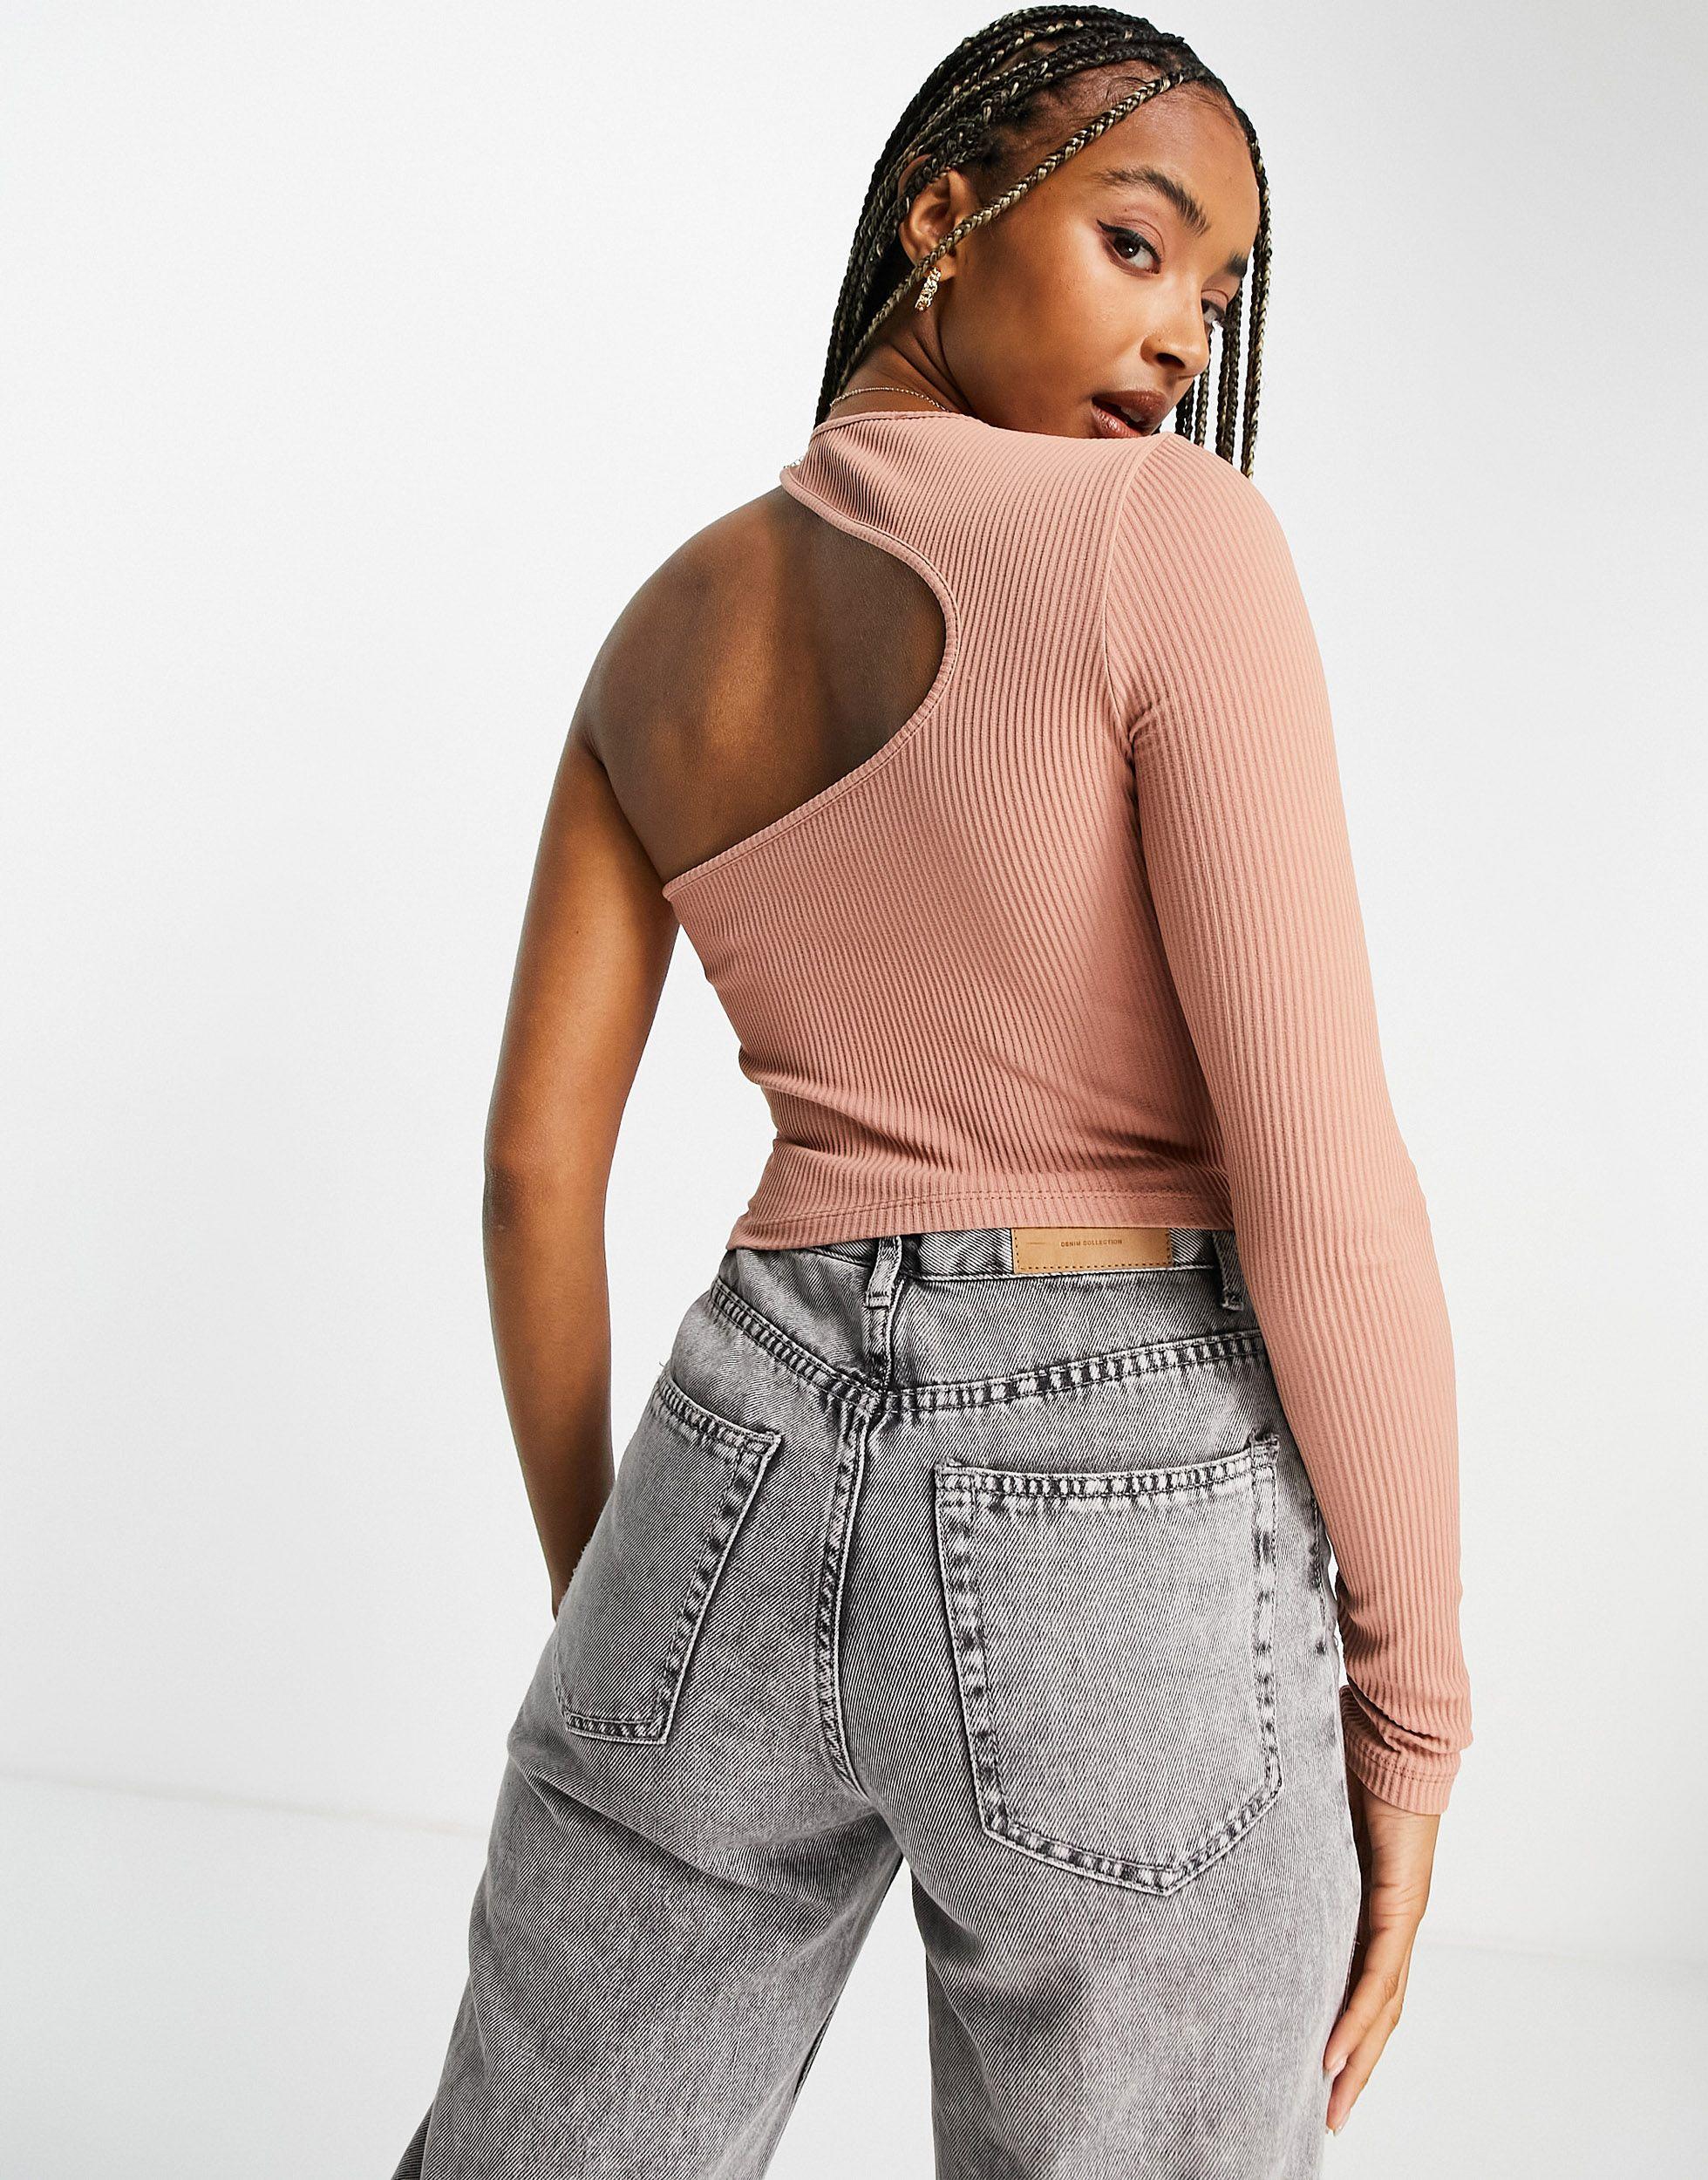 Bershka Synthetic Asymetric Cut Out One Shoulder Crop Top | Lyst